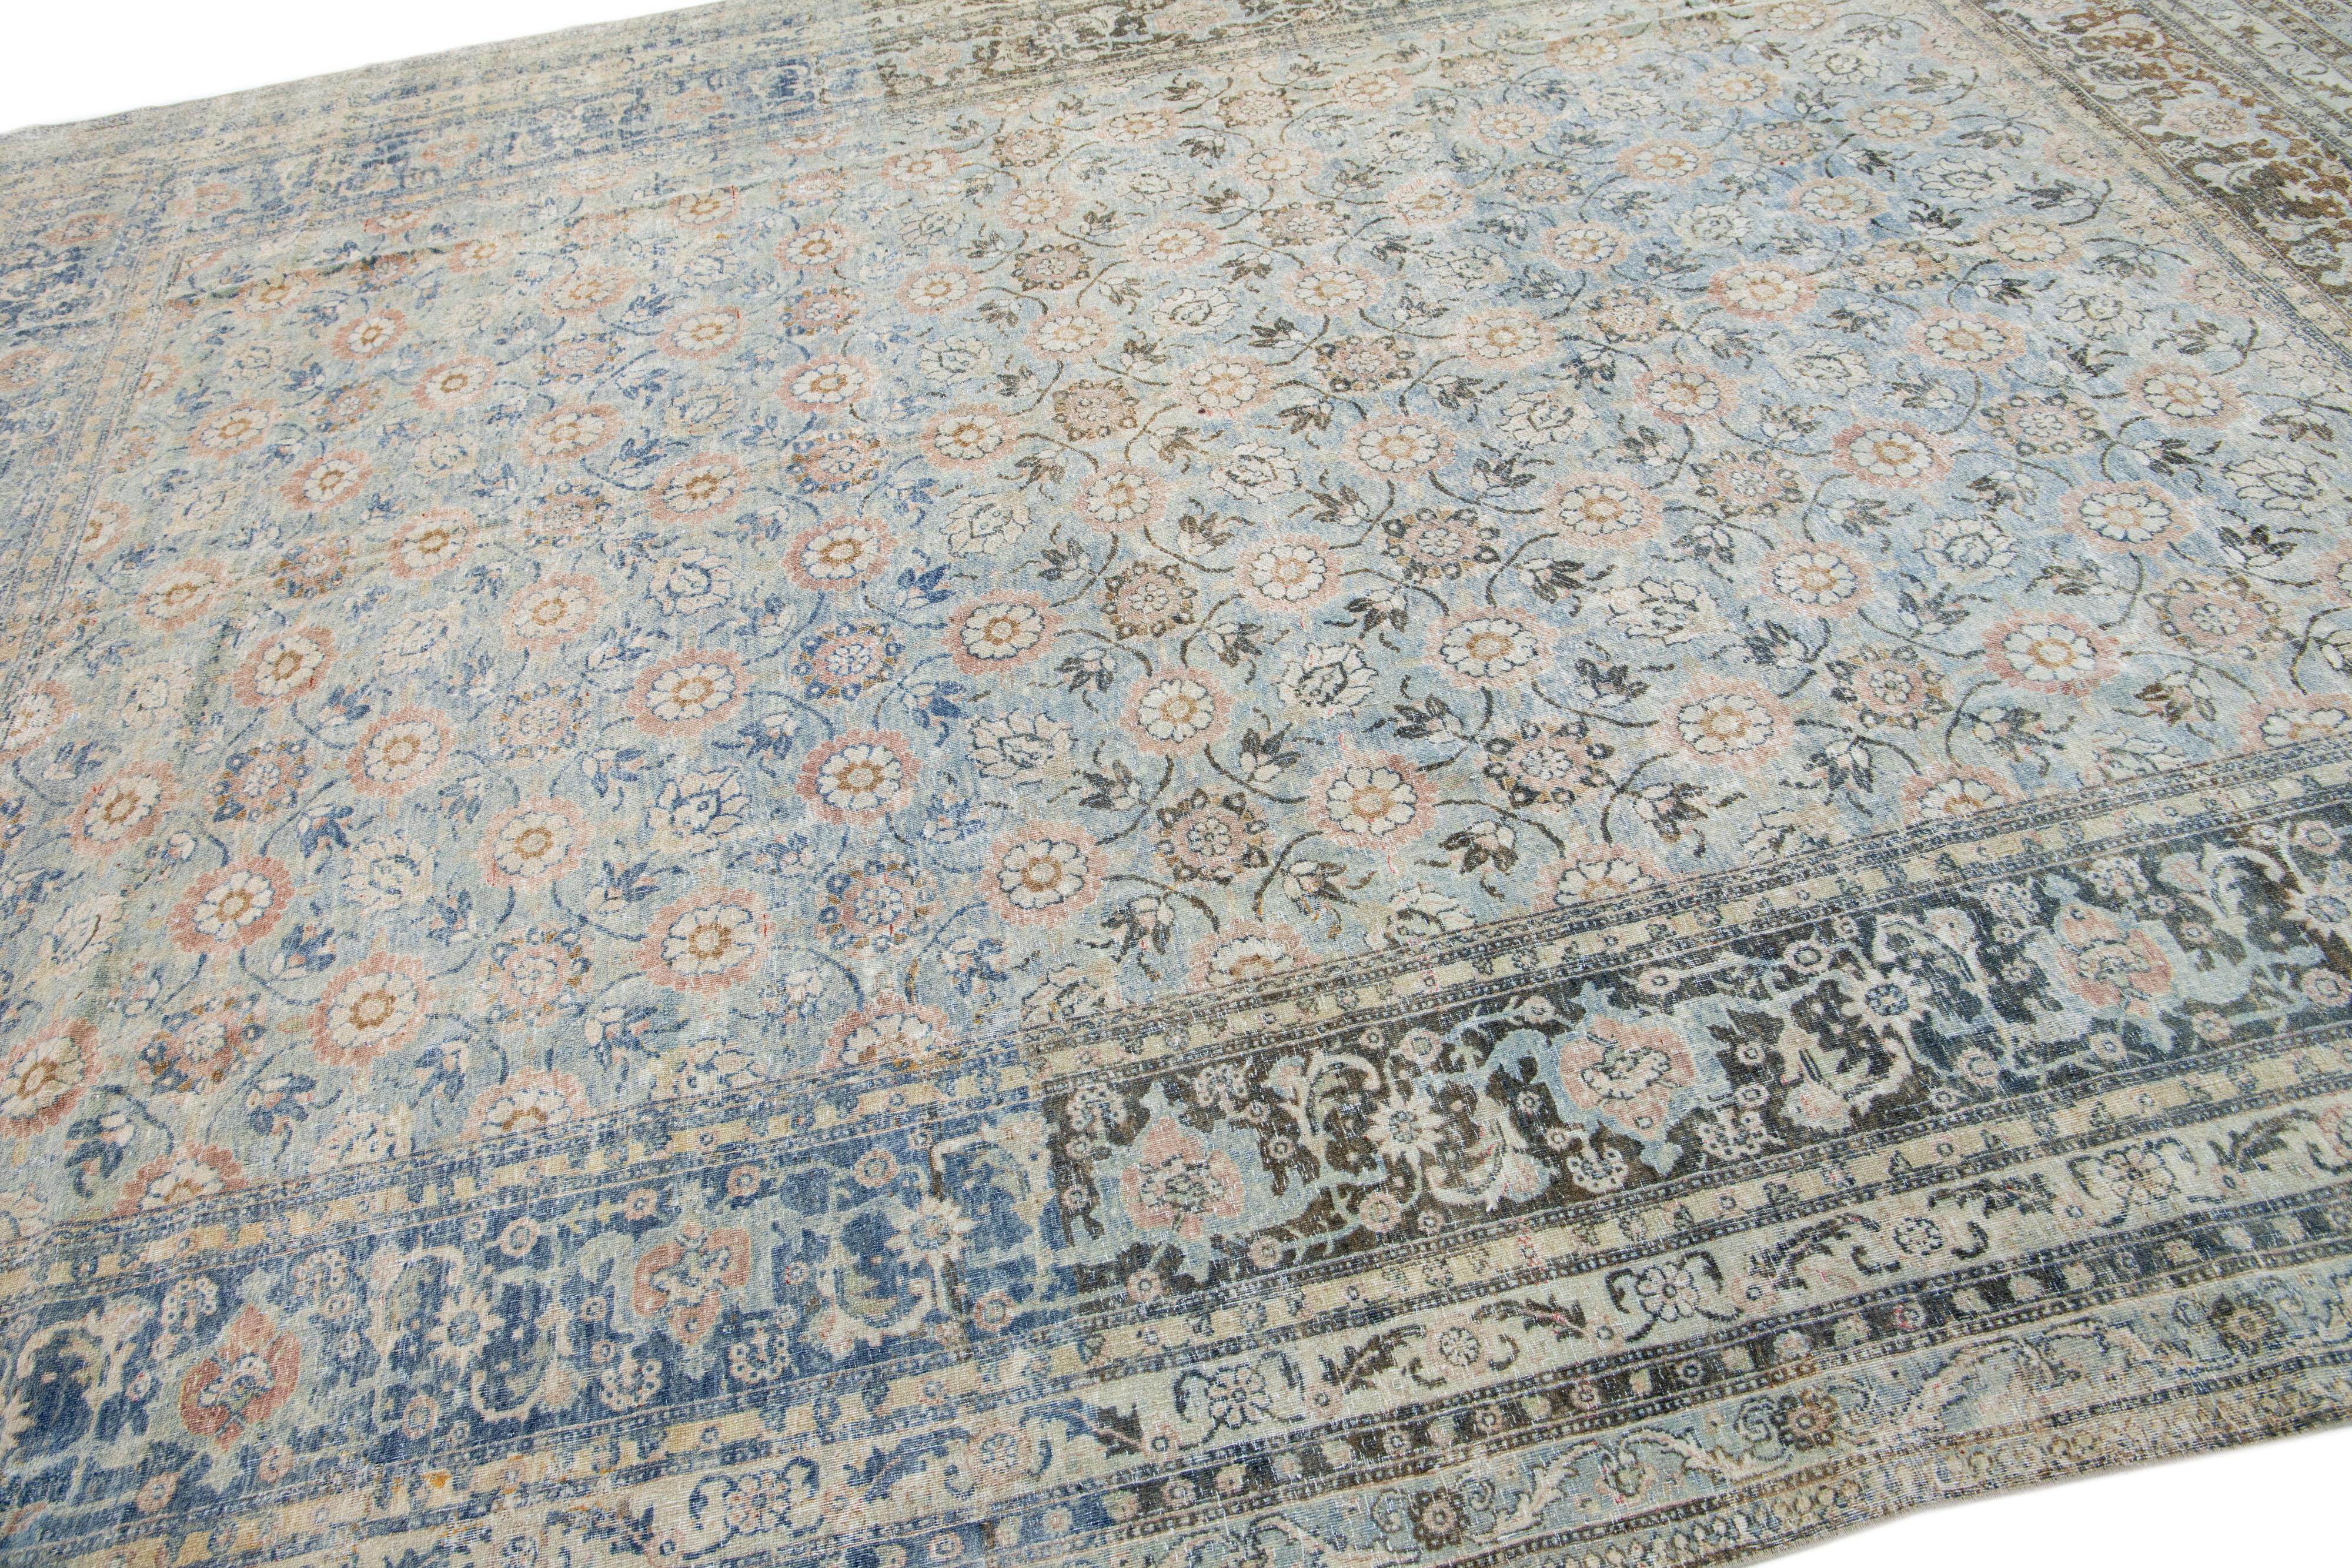 19th Century Antique Persian Tabriz Wool Rug Handmade Blue with Floral Motif In Good Condition For Sale In Norwalk, CT